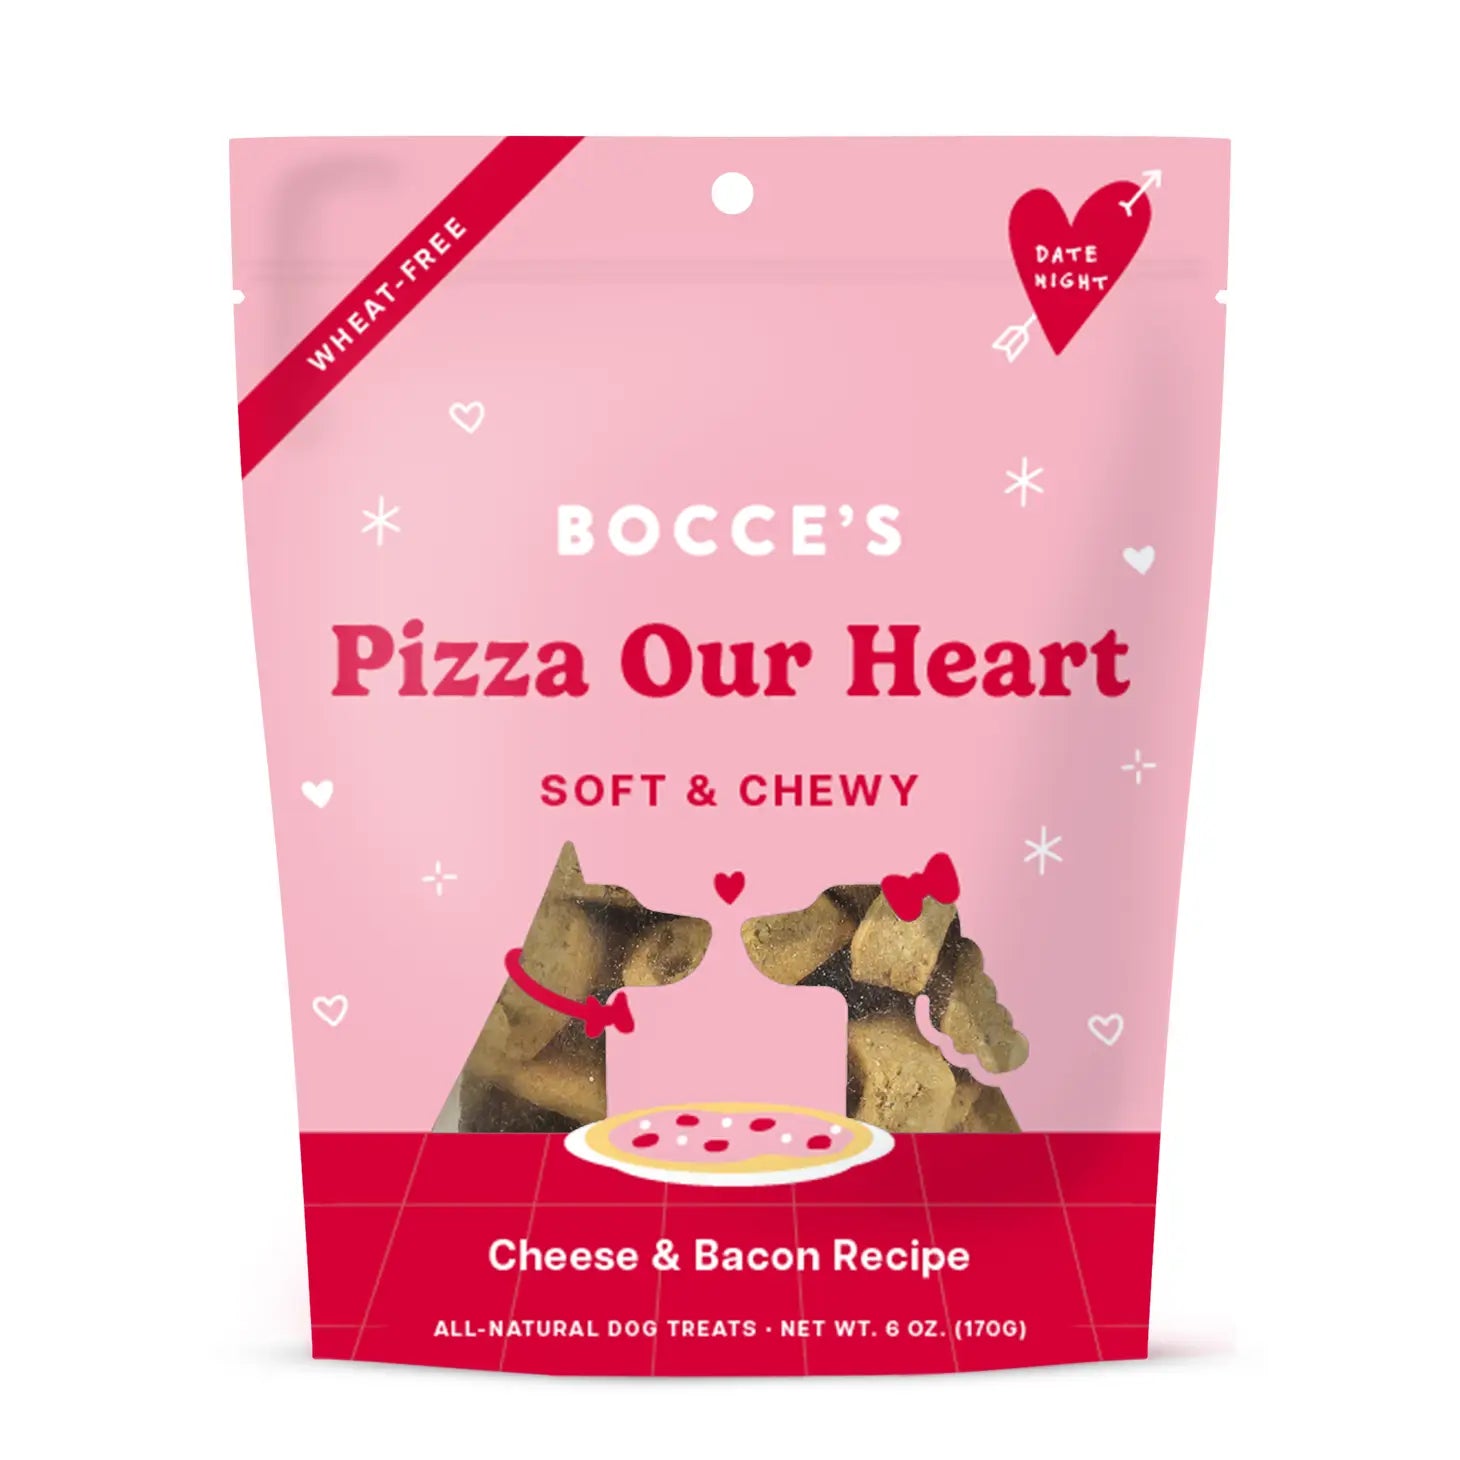 Bocce's Bakery - Biscuits Soft & Chewy Pizza Our Heart